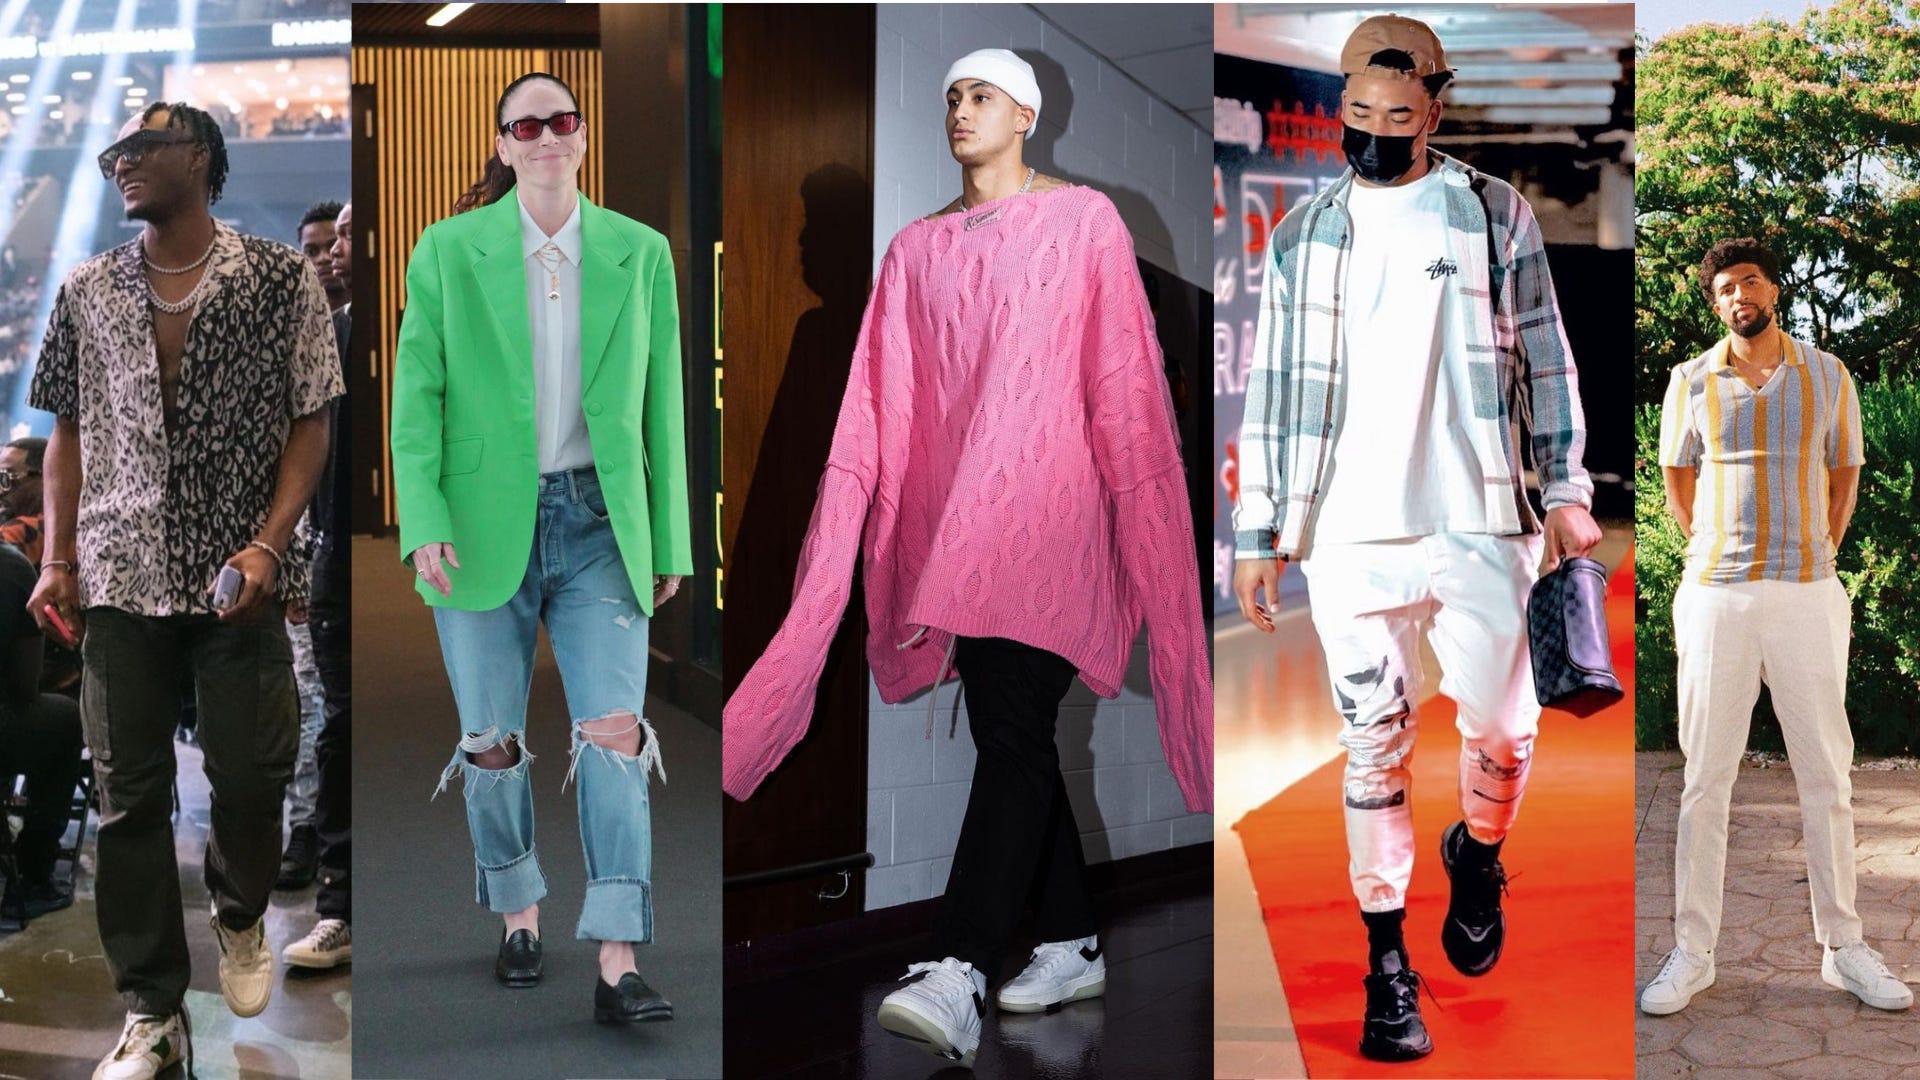 Stylists to NBA's best offer perspective on how fashion can help hockey grow